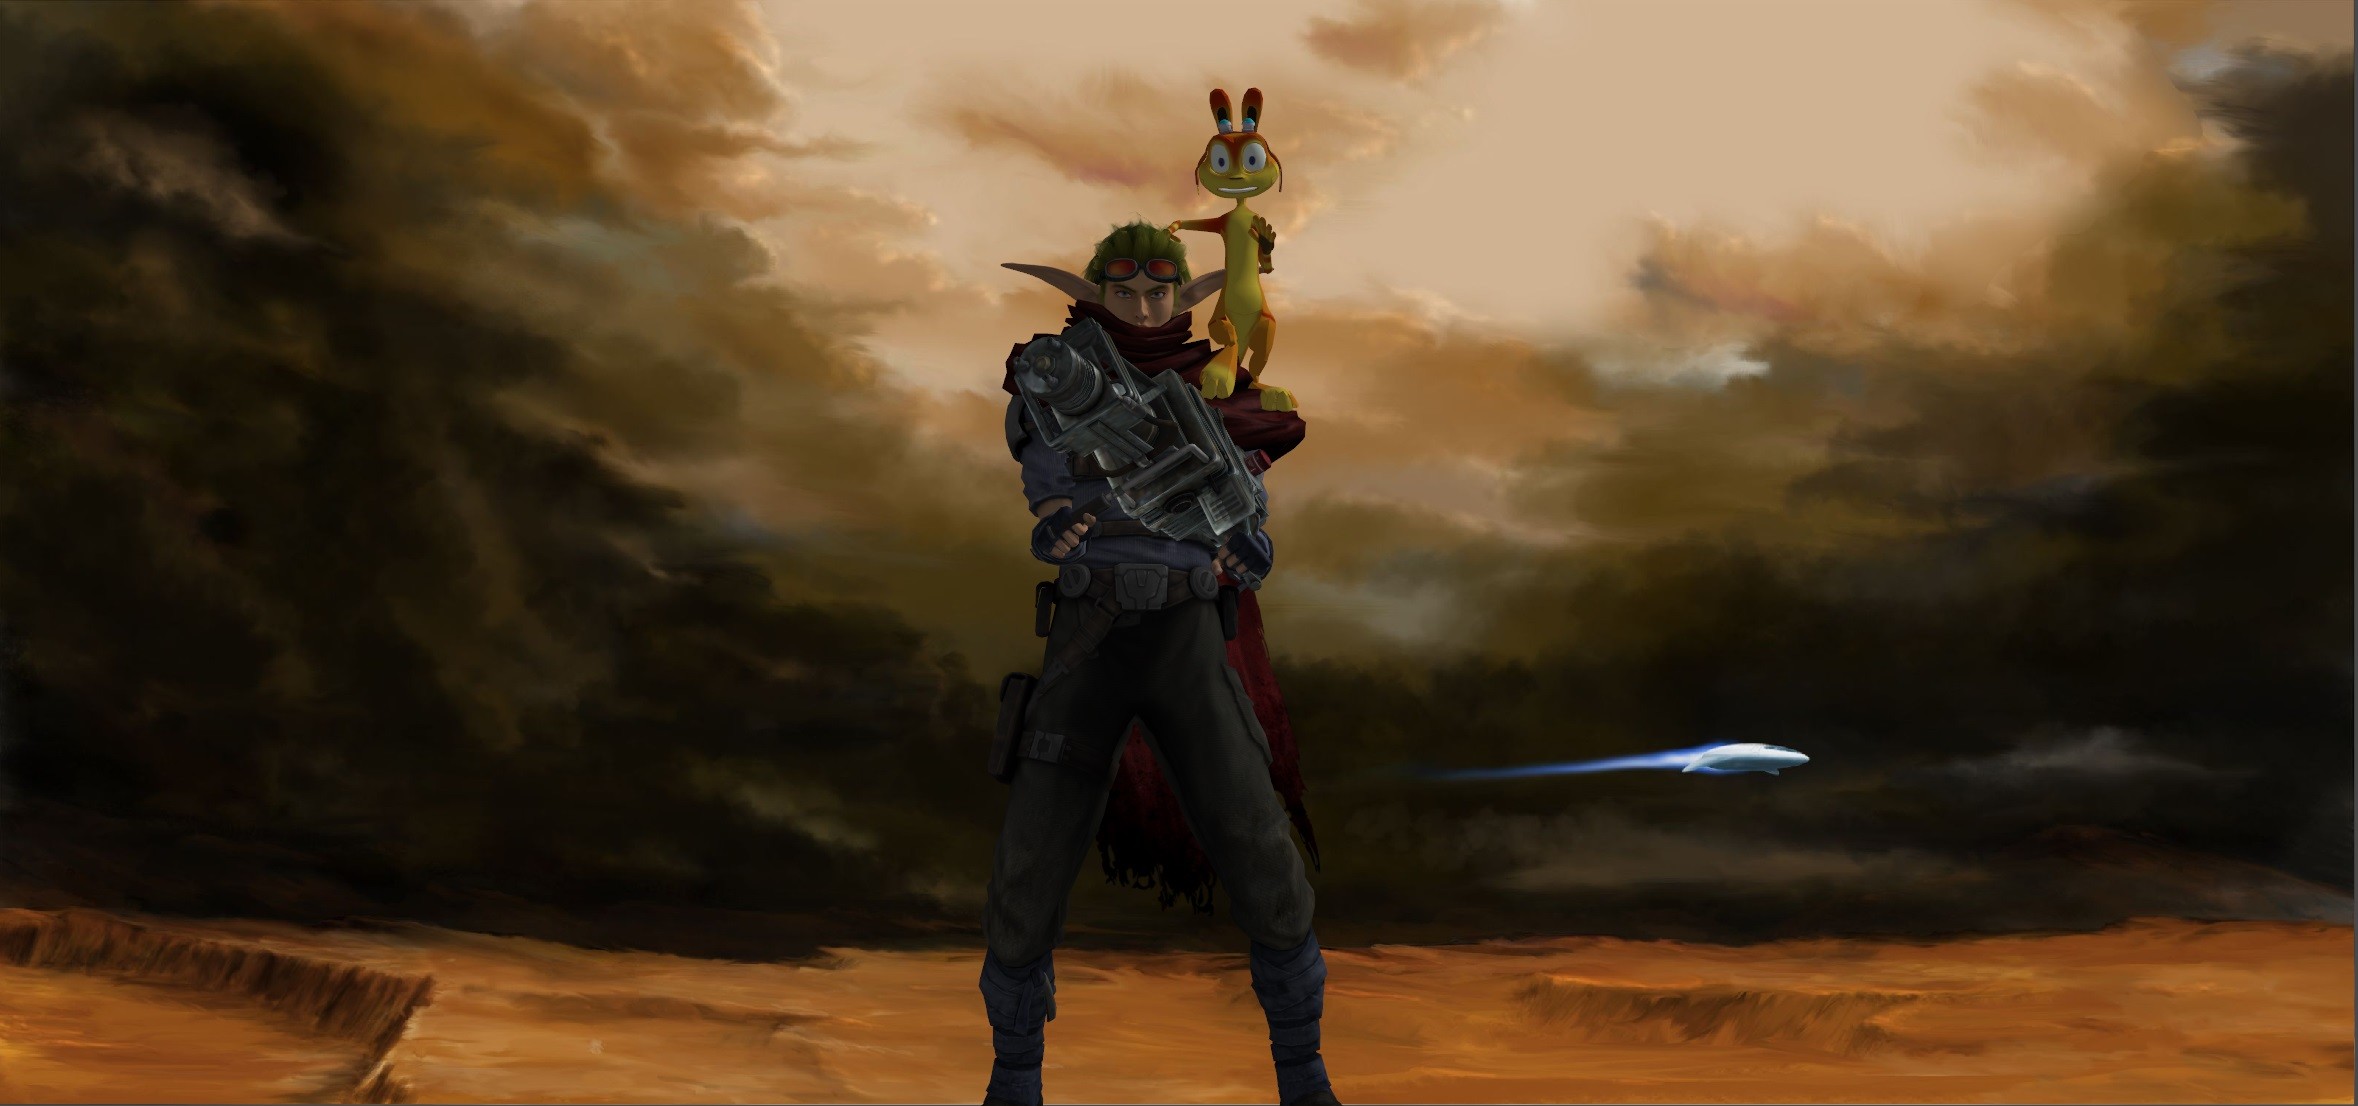 2358x1106 Jak and Daxter wallpaper by calibur222 Jak and Daxter wallpaper by  calibur222